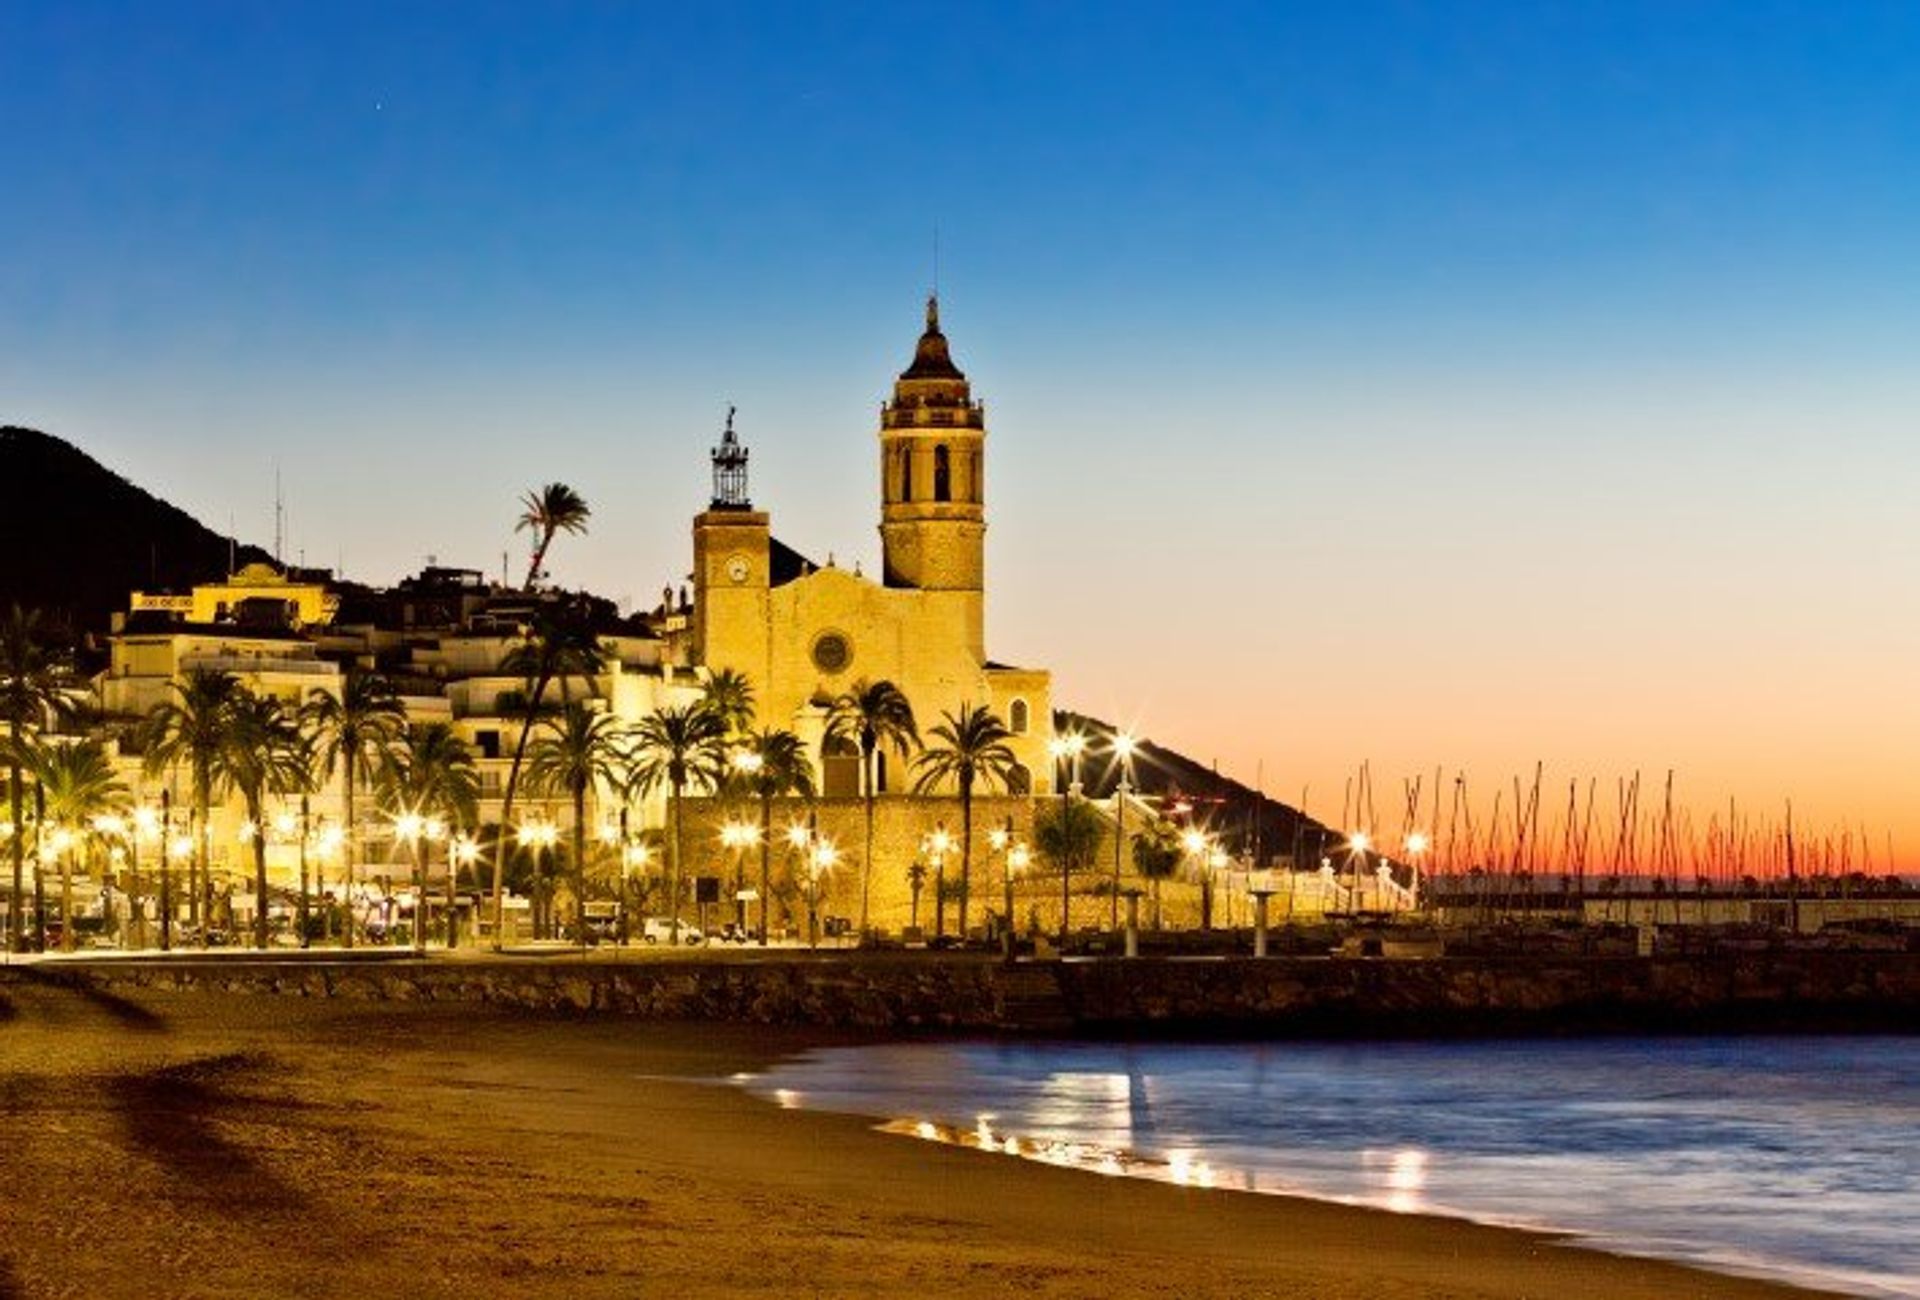 The upscale resort of Sitges, southwest of Barceona, is known for its colourful nightlife